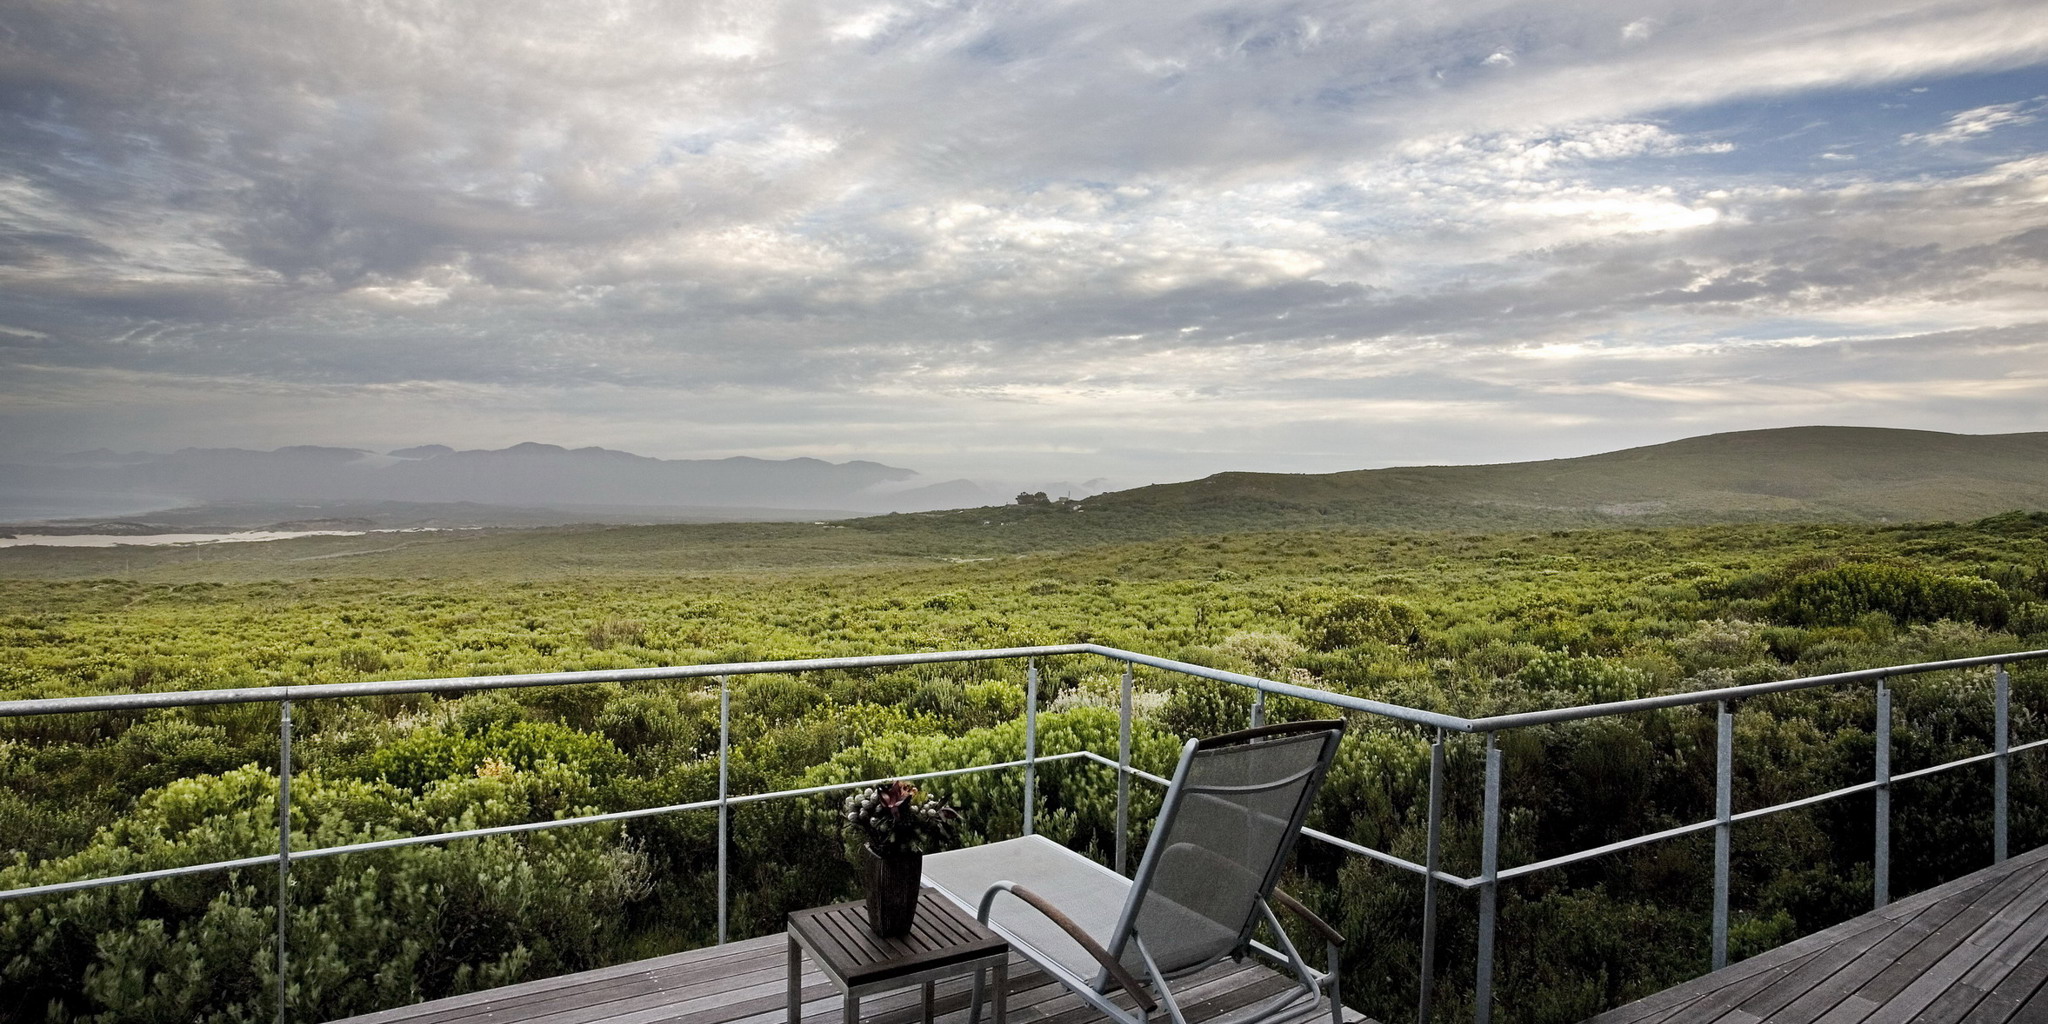 grootbos private nature reserve, lounge deck, south africa